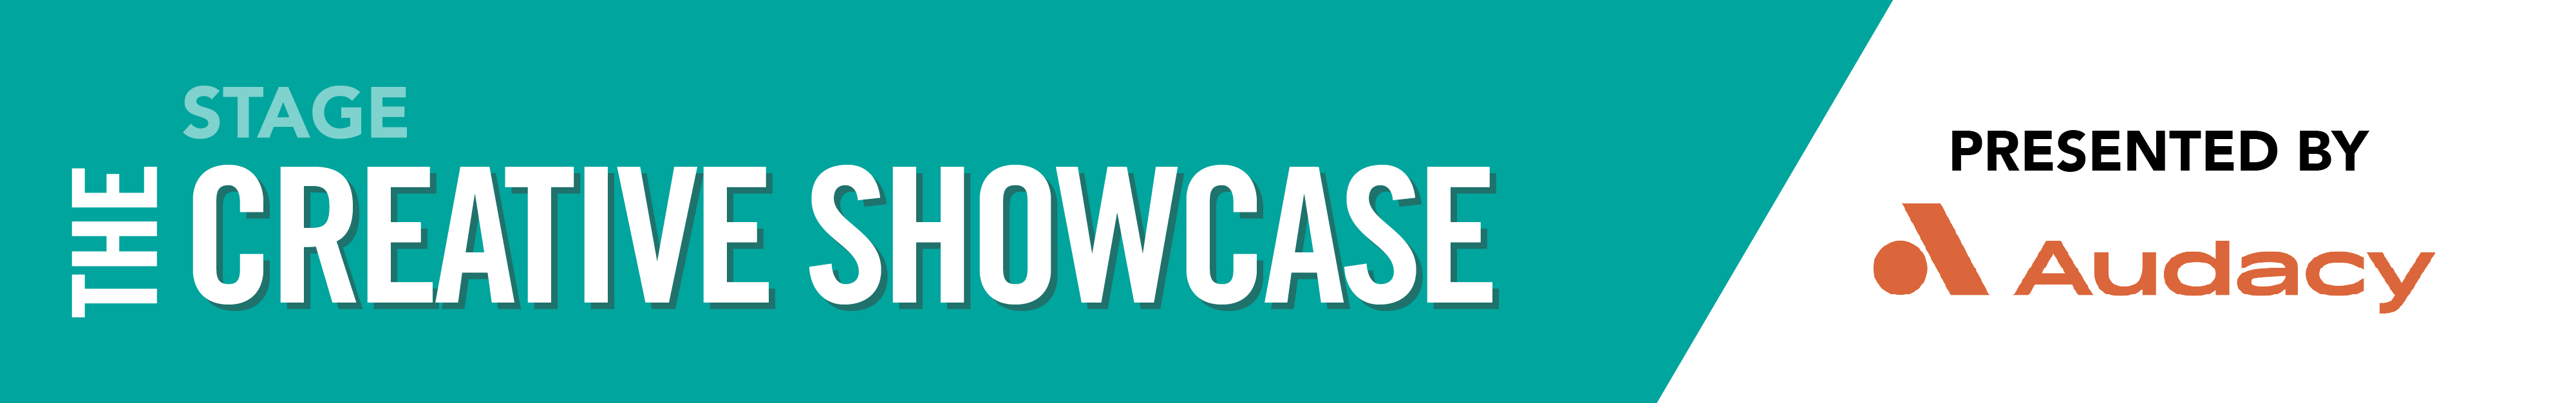 The Creative Showcase, Presented by Audacy